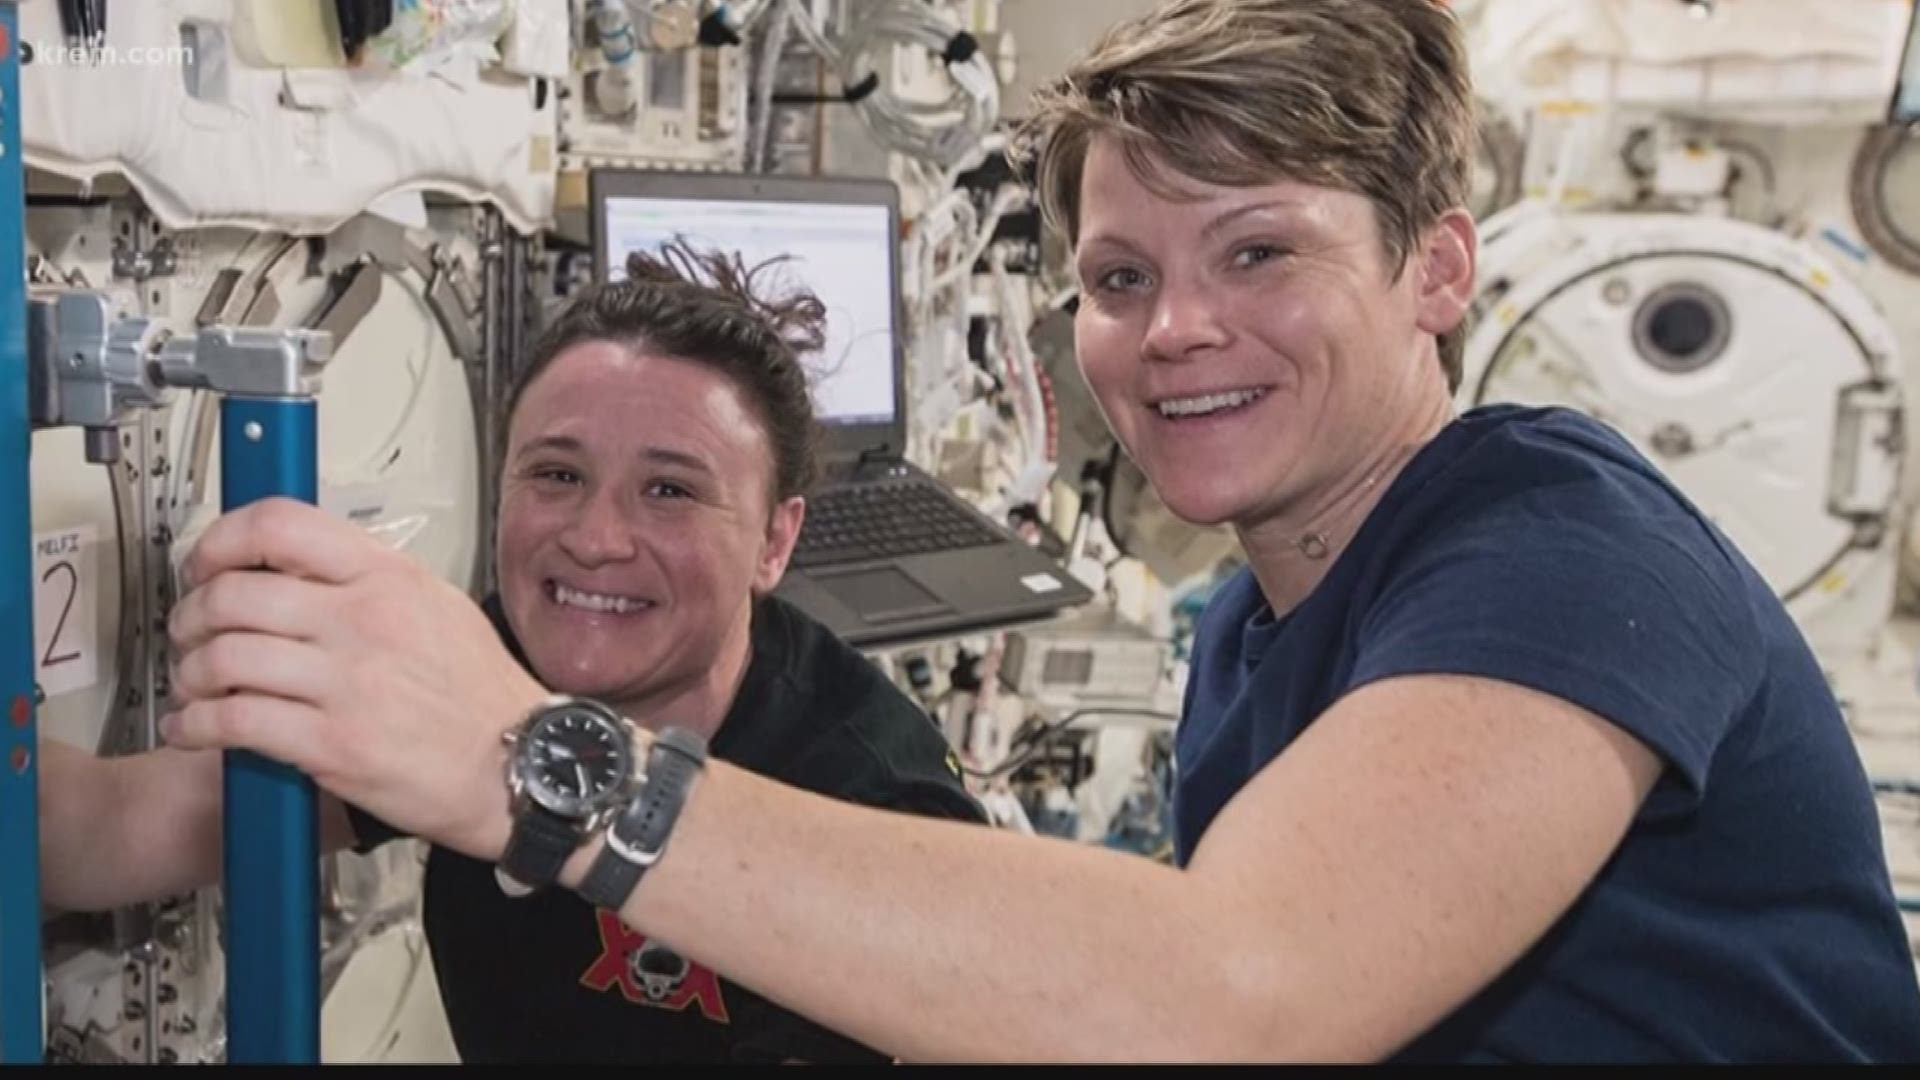 There is no escaping the holiday spirit - even in space. Spokane native Anne McClain is on the International Space Station working and preparing for the Christmas holiday.